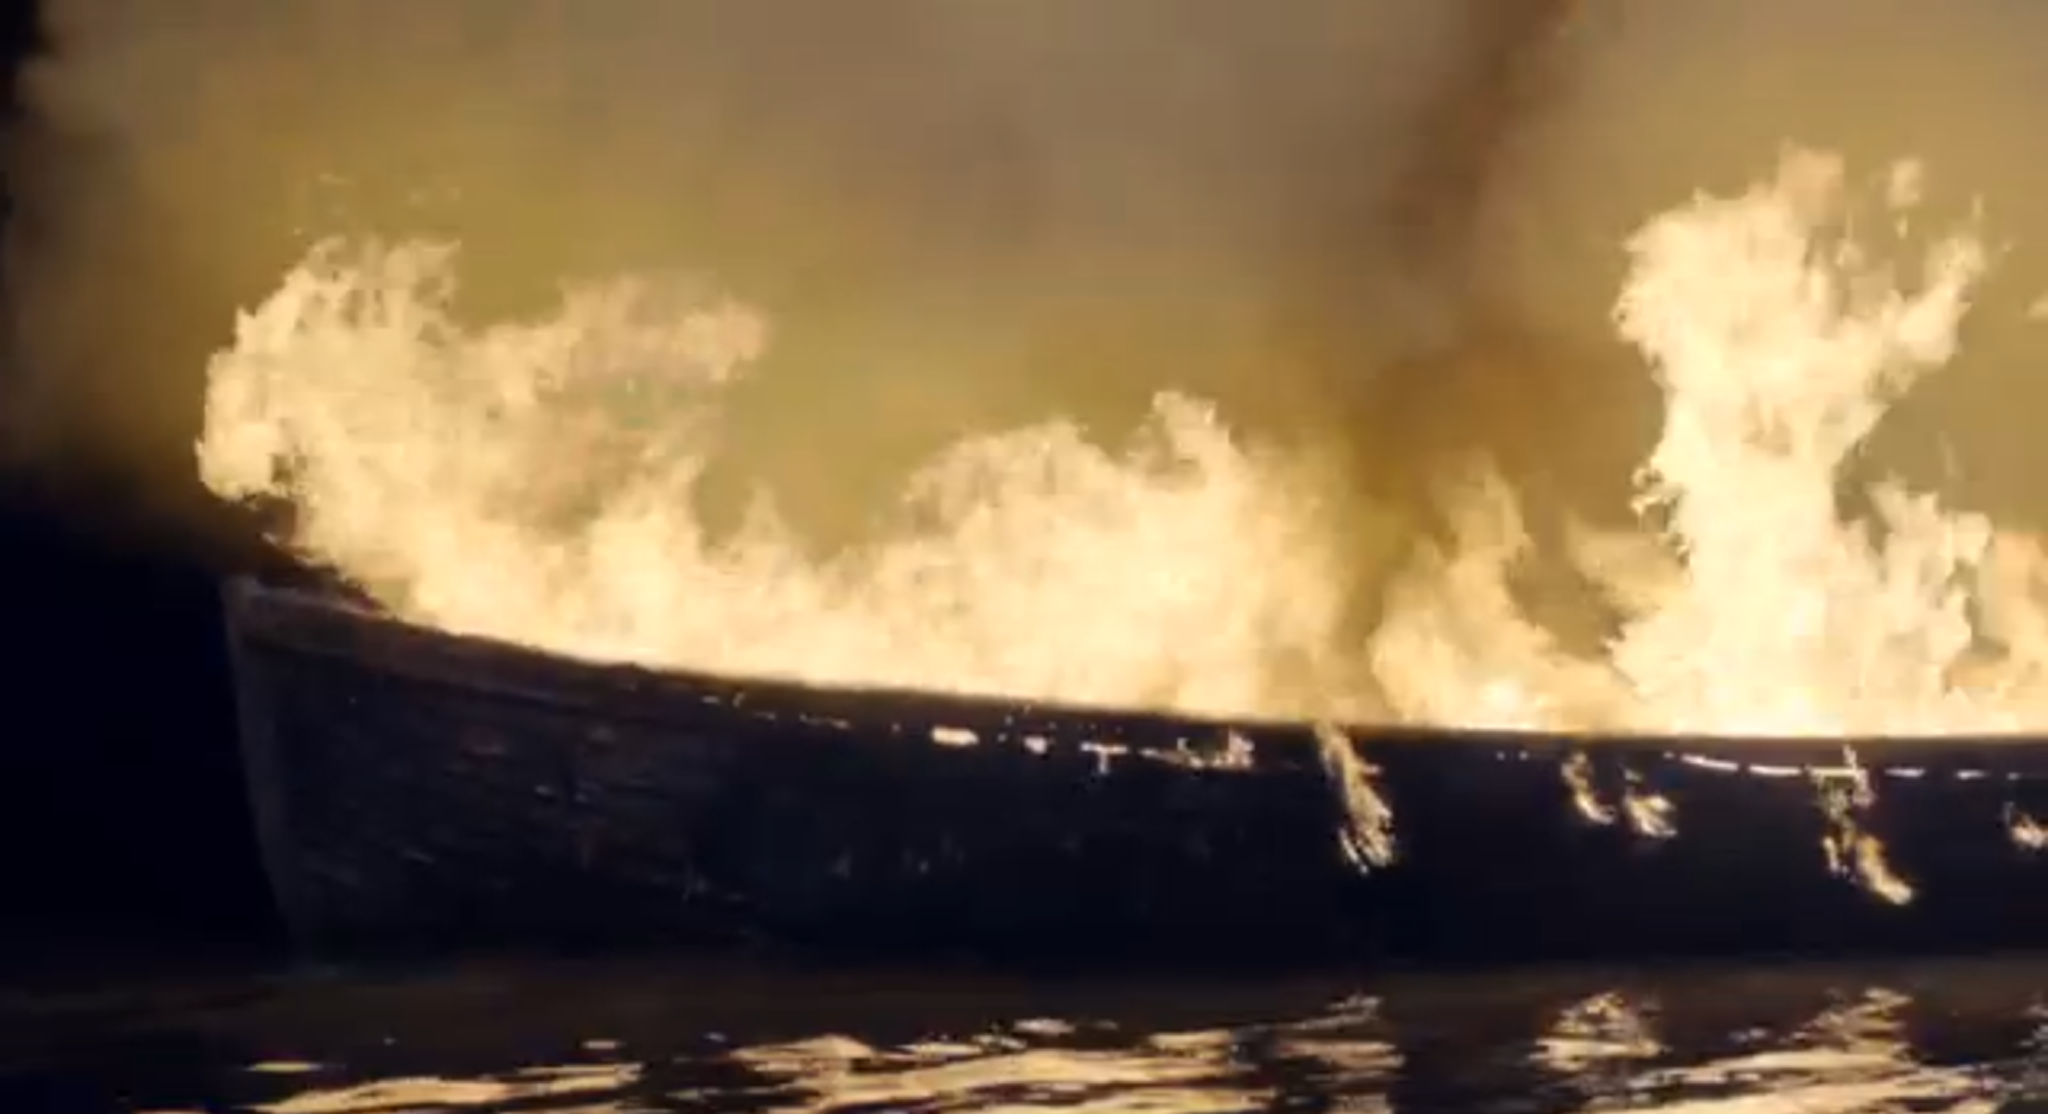 The burning boat in Broadchurch has forced Viking River Cruises to pull out of sponsorship for now